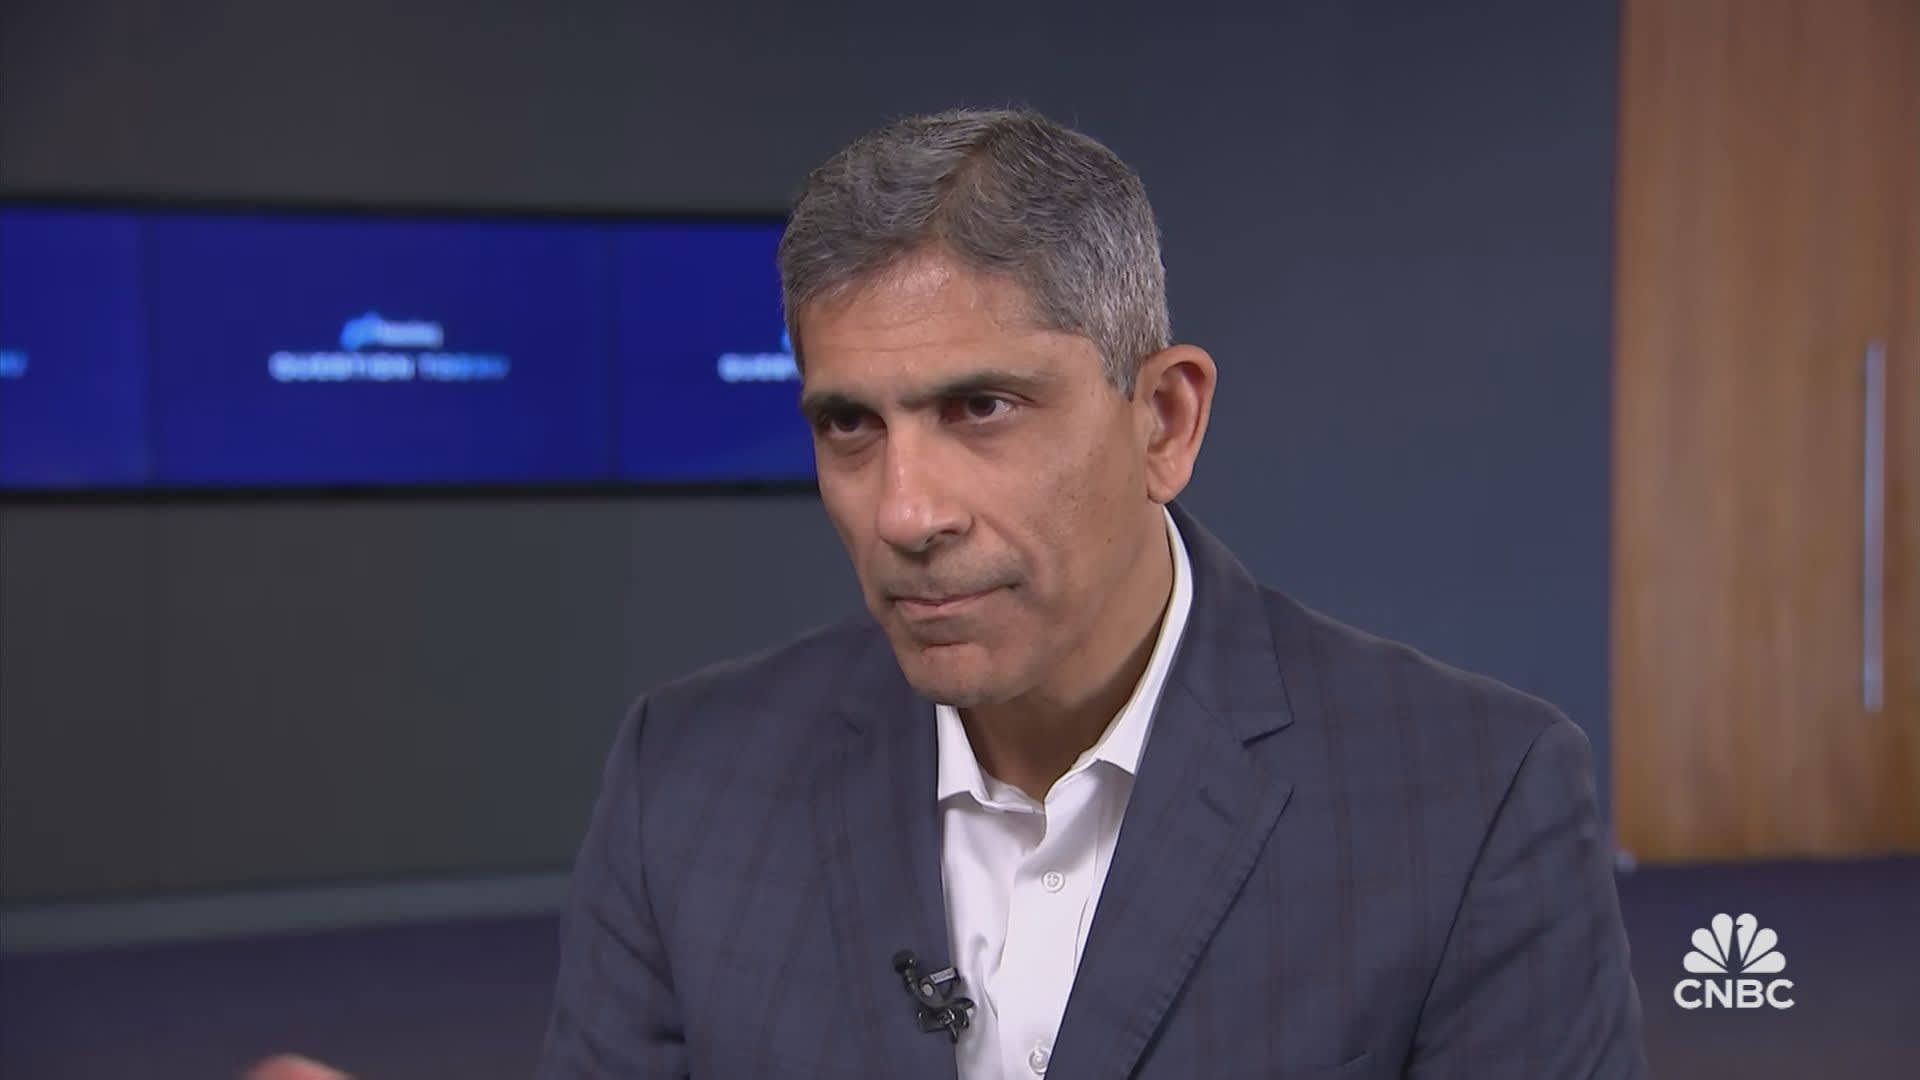 Honeywell CEO Vimal Kapur on the labor skills shortage and how automation, AI are changing manufacturing [Video]